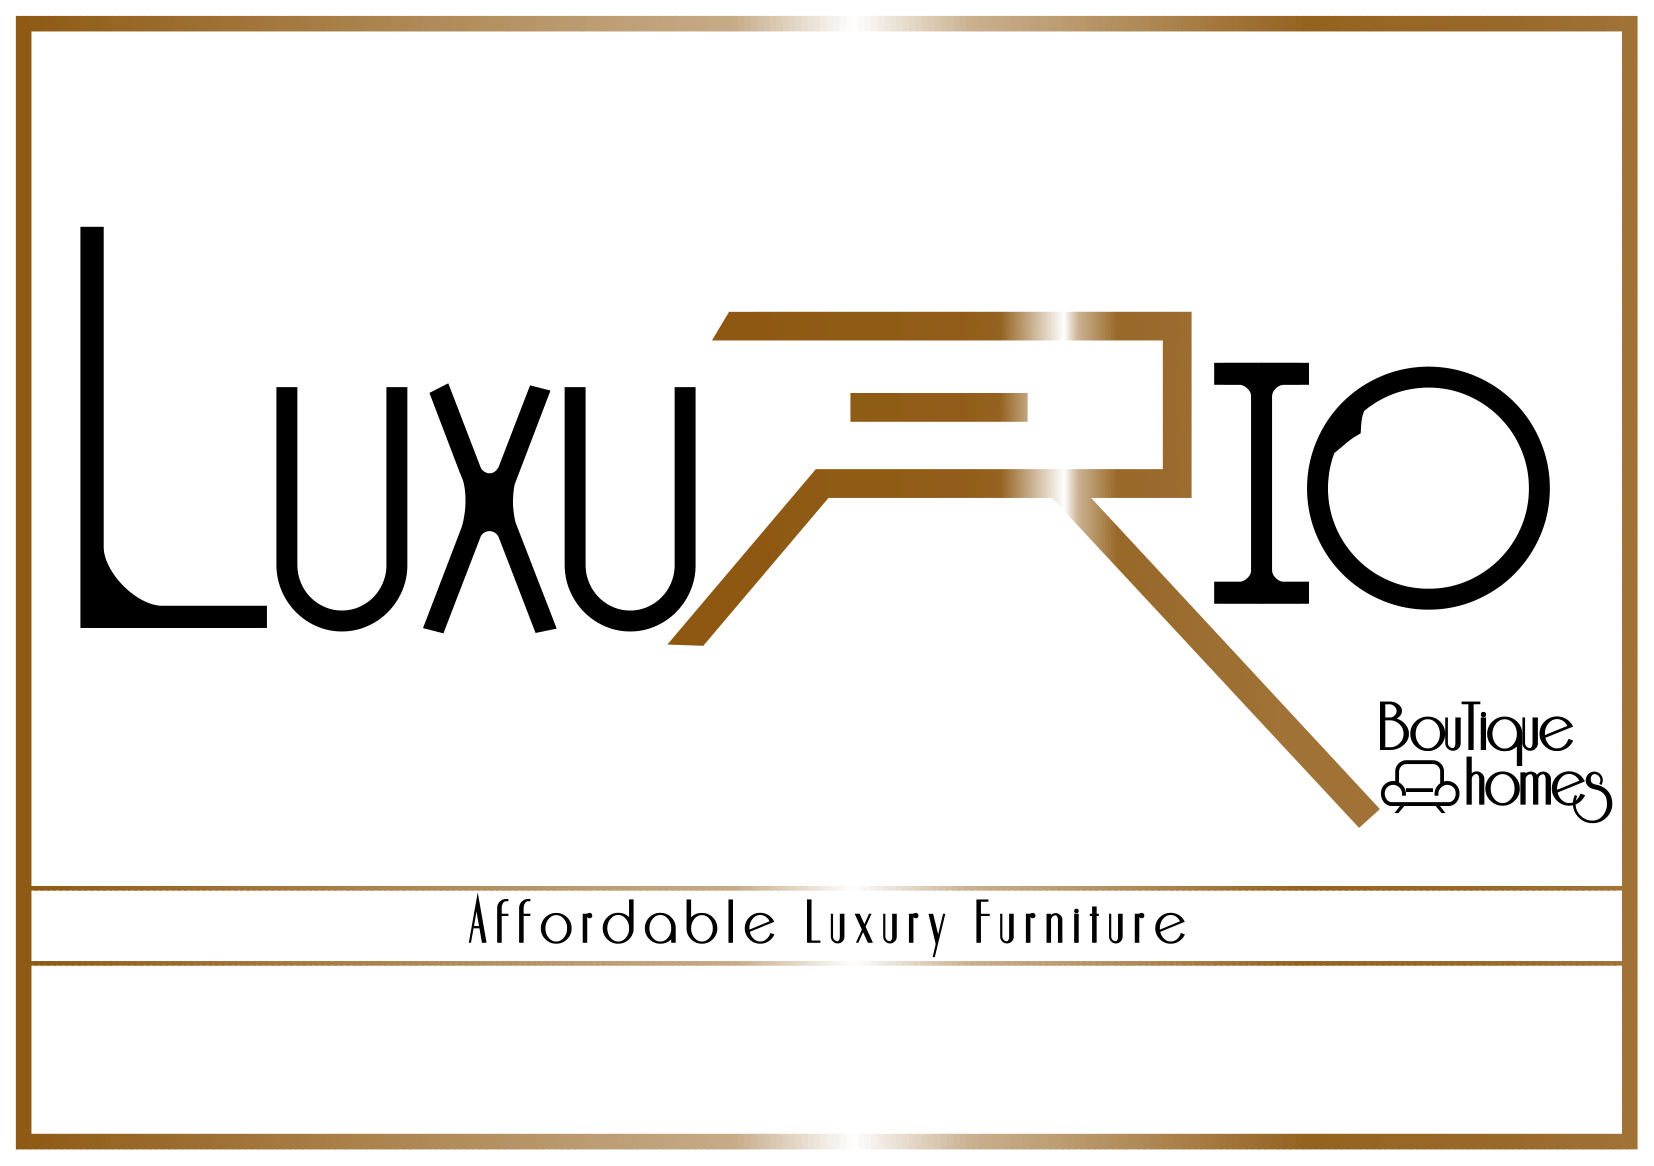 luxurio boutique homes | furniture in greater hyderabad